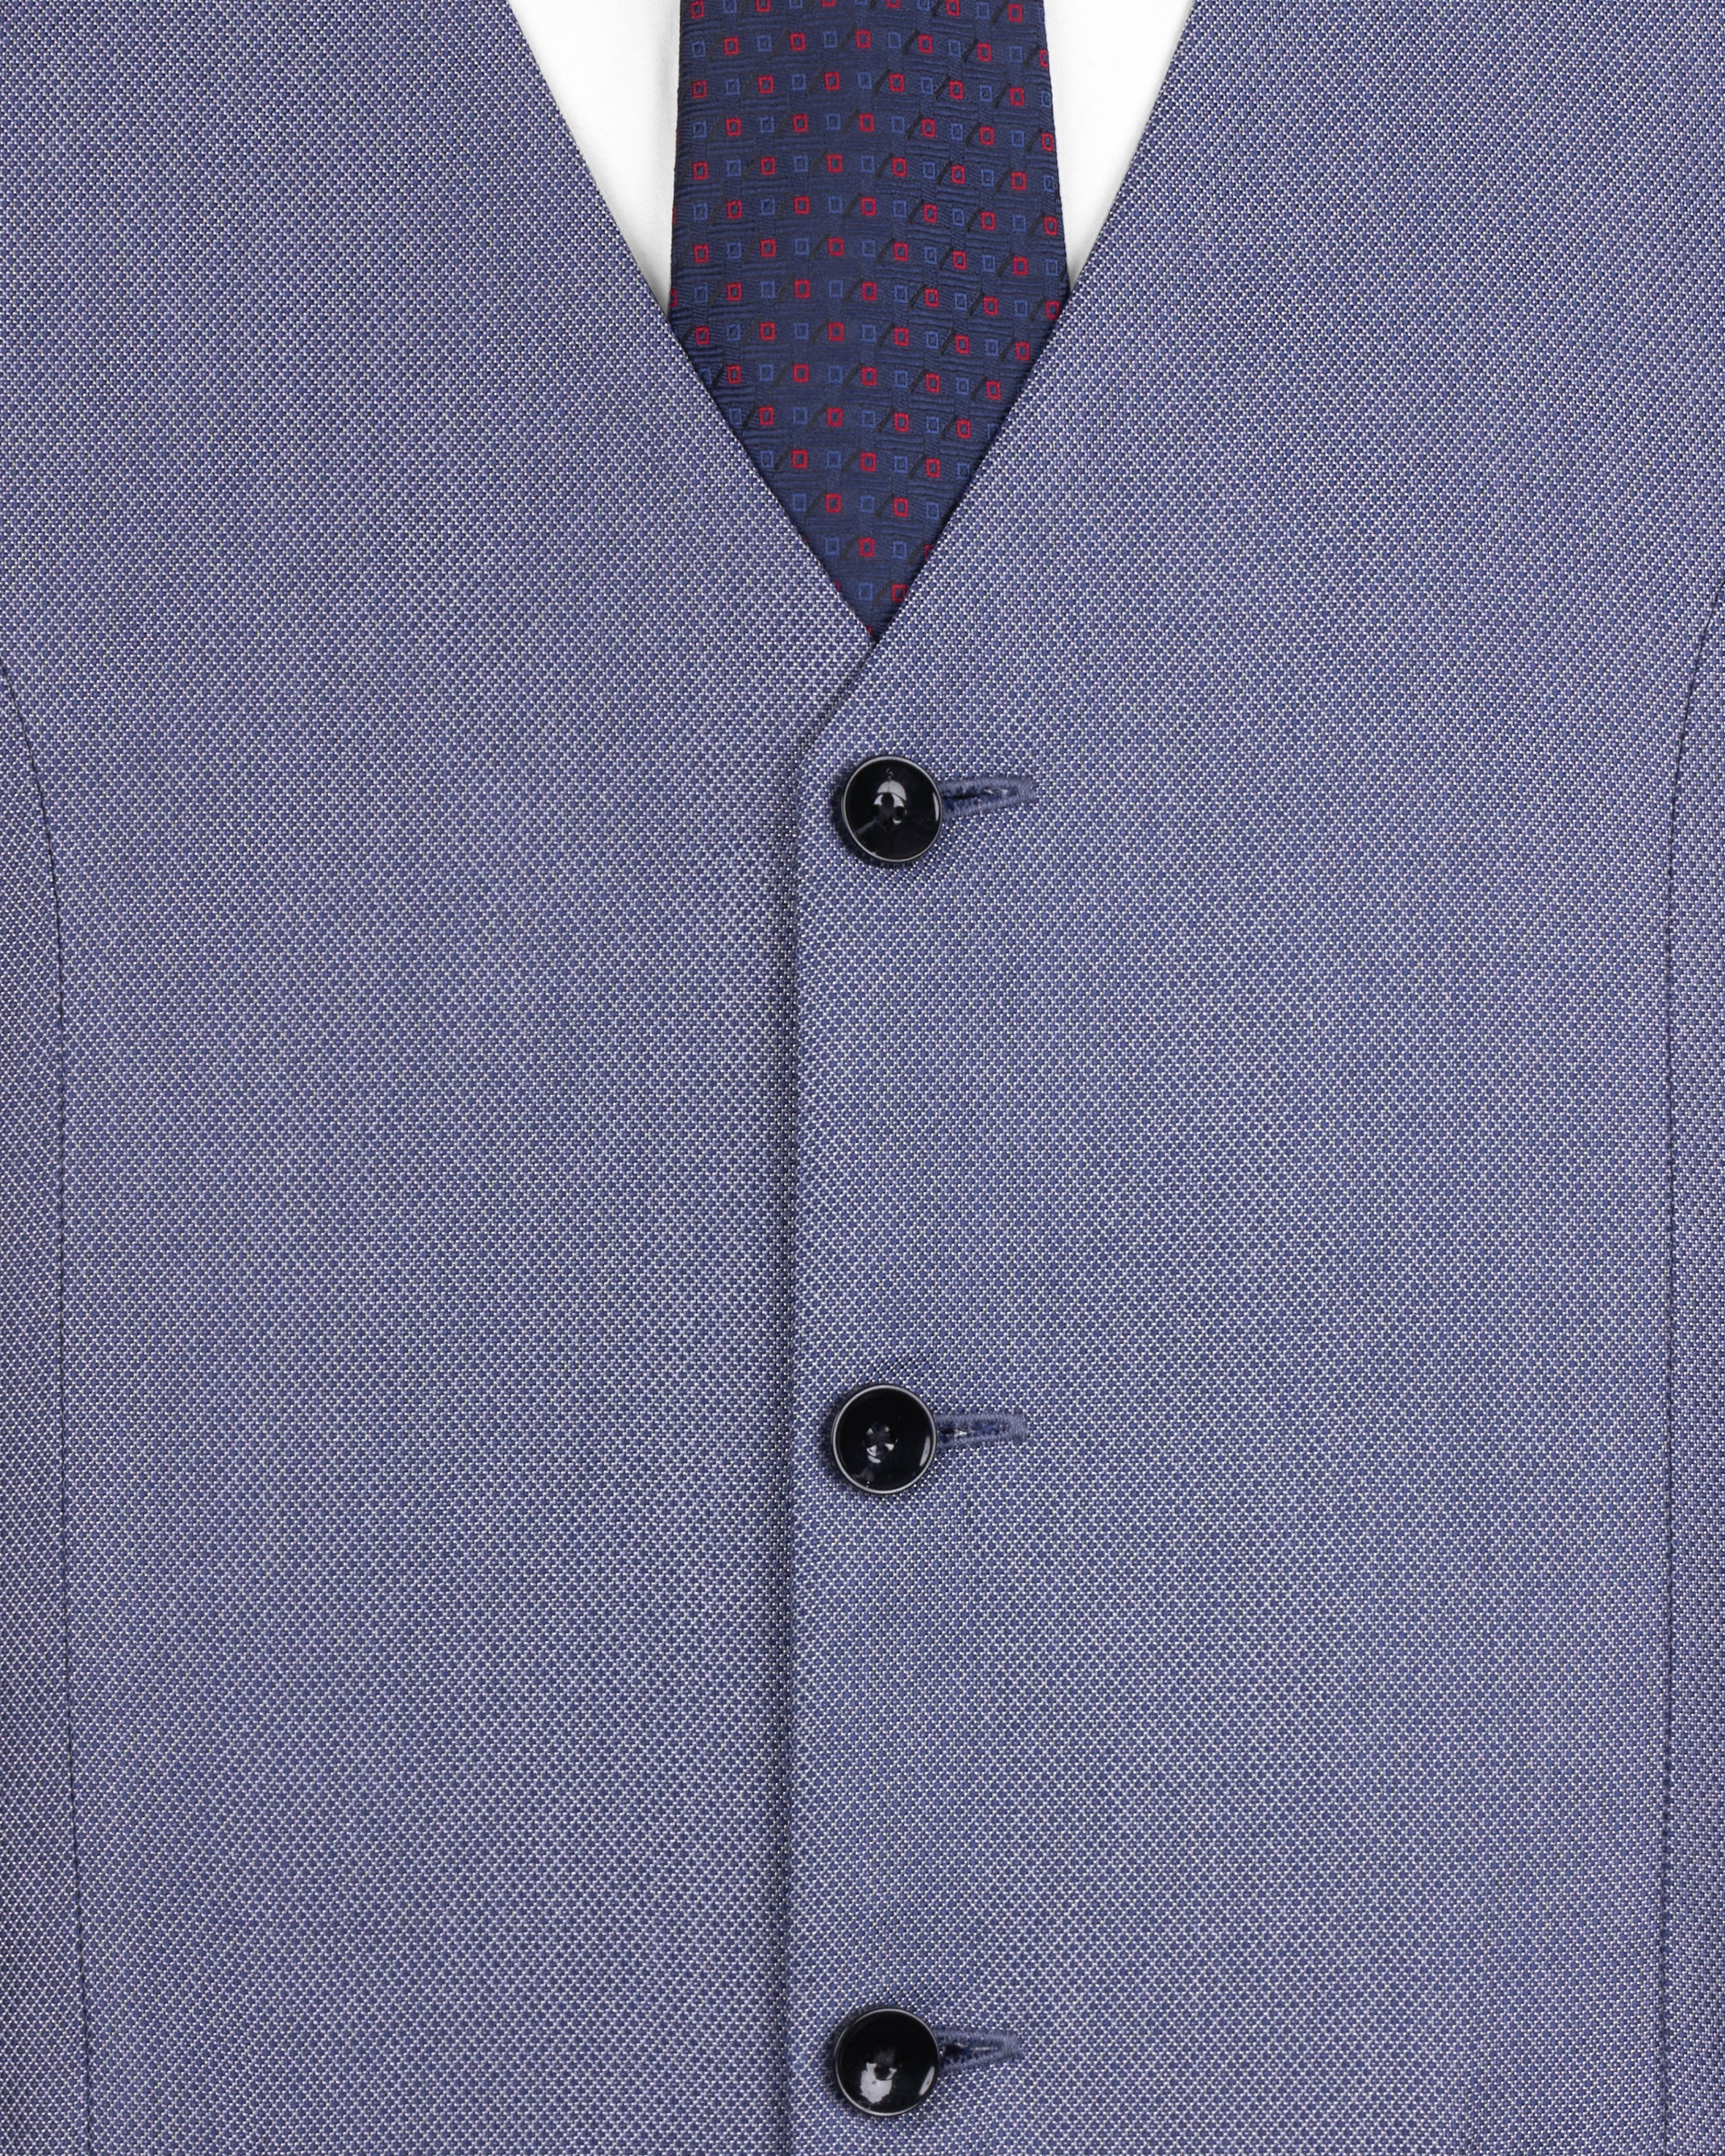 Dolphin Blue Textured Single Breasted Designer Suit ST2613-SB-D19-36, ST2613-SB-D19-38, ST2613-SB-D19-40, ST2613-SB-D19-42, ST2613-SB-D19-44, ST2613-SB-D19-46, ST2613-SB-D19-48, ST2613-SB-D19-50, ST2613-SB-D19-52, ST2613-SB-D19-54, ST2613-SB-D19-56, ST2613-SB-D19-58, ST2613-SB-D19-60